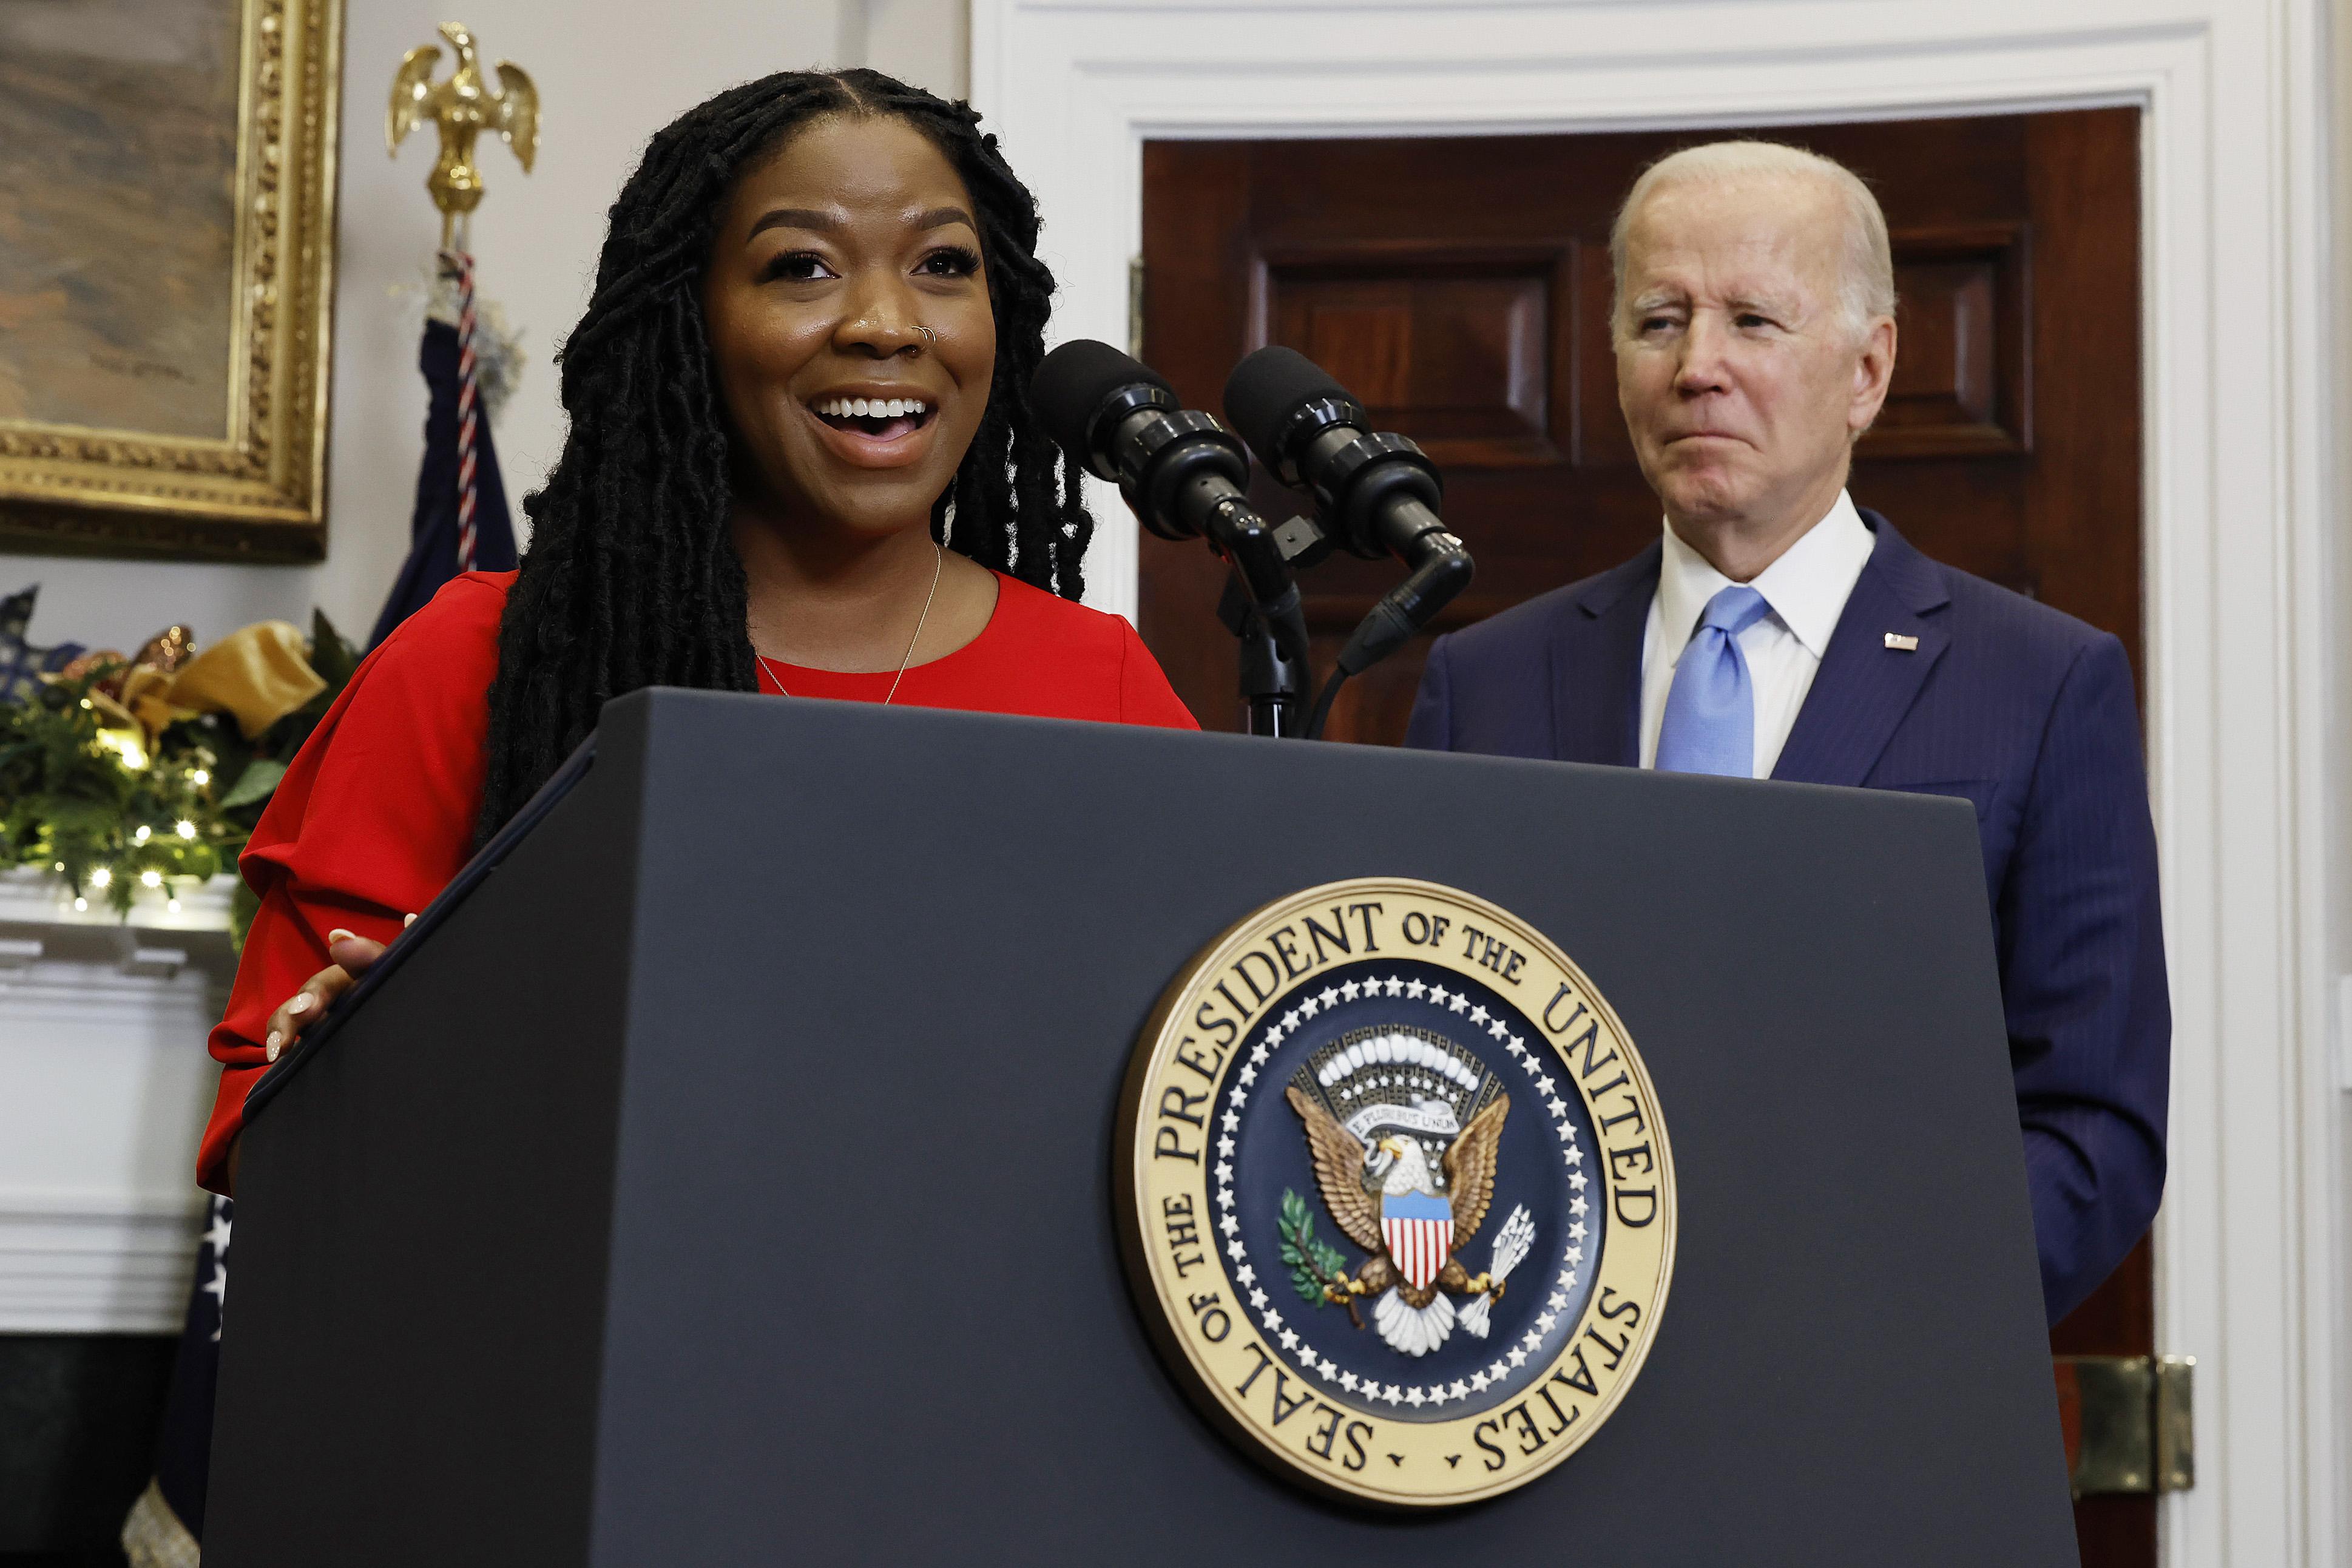 Cherelle Griner, wife of Olympian and WNBA player Brittney Griner, speaks after U.S. President Joe Biden announced her release from Russian custody. She is wearing a red dress and is in the oval office.